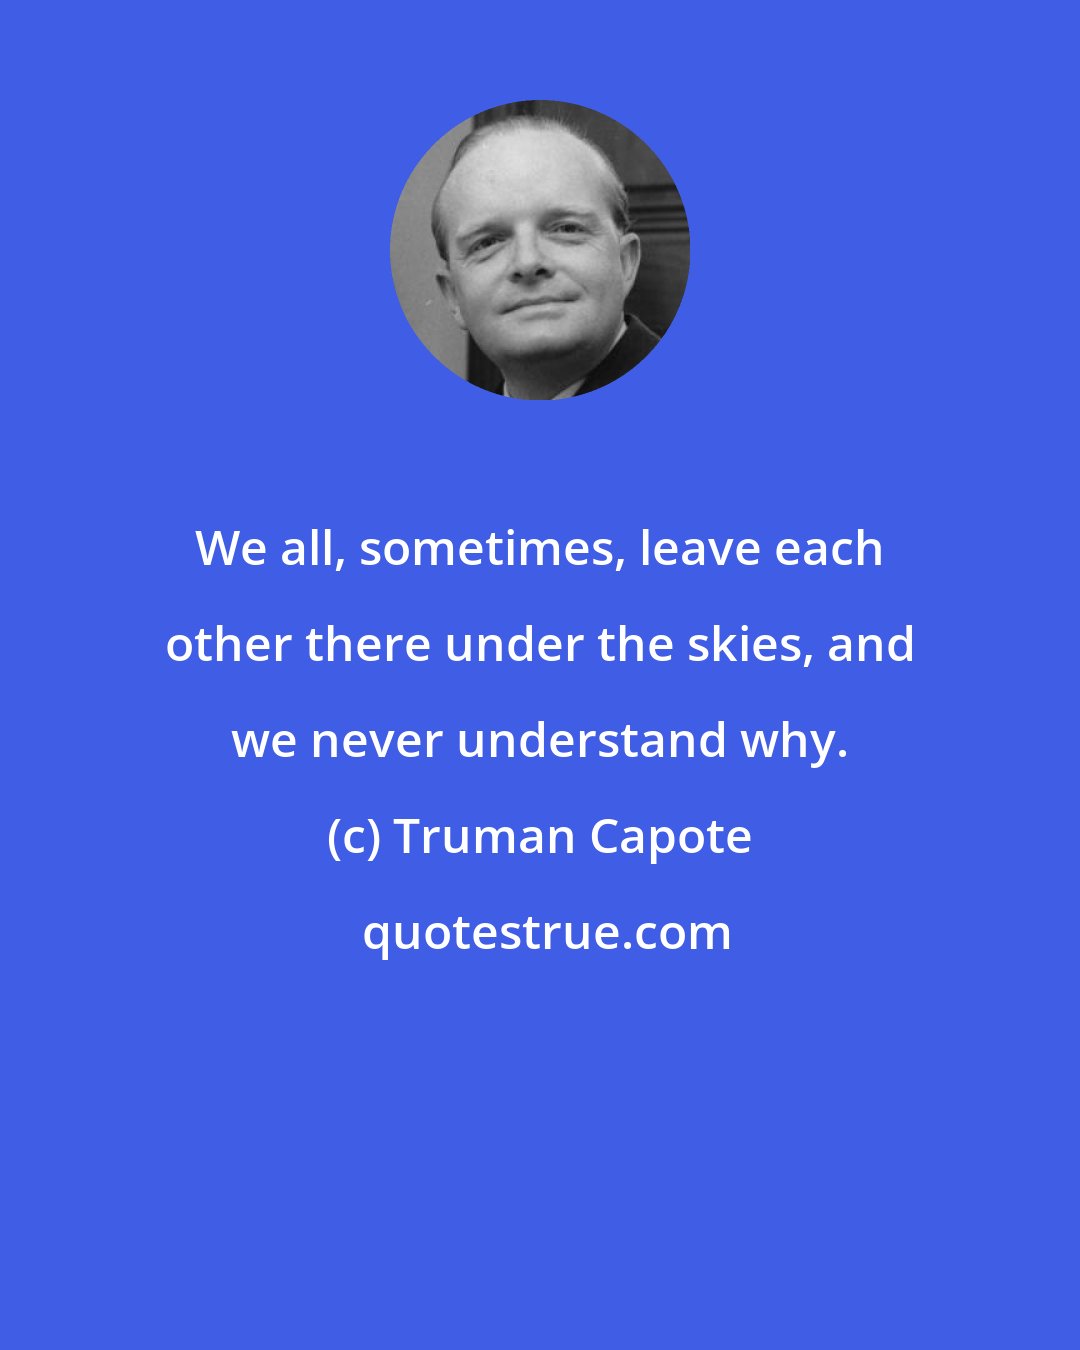 Truman Capote: We all, sometimes, leave each other there under the skies, and we never understand why.